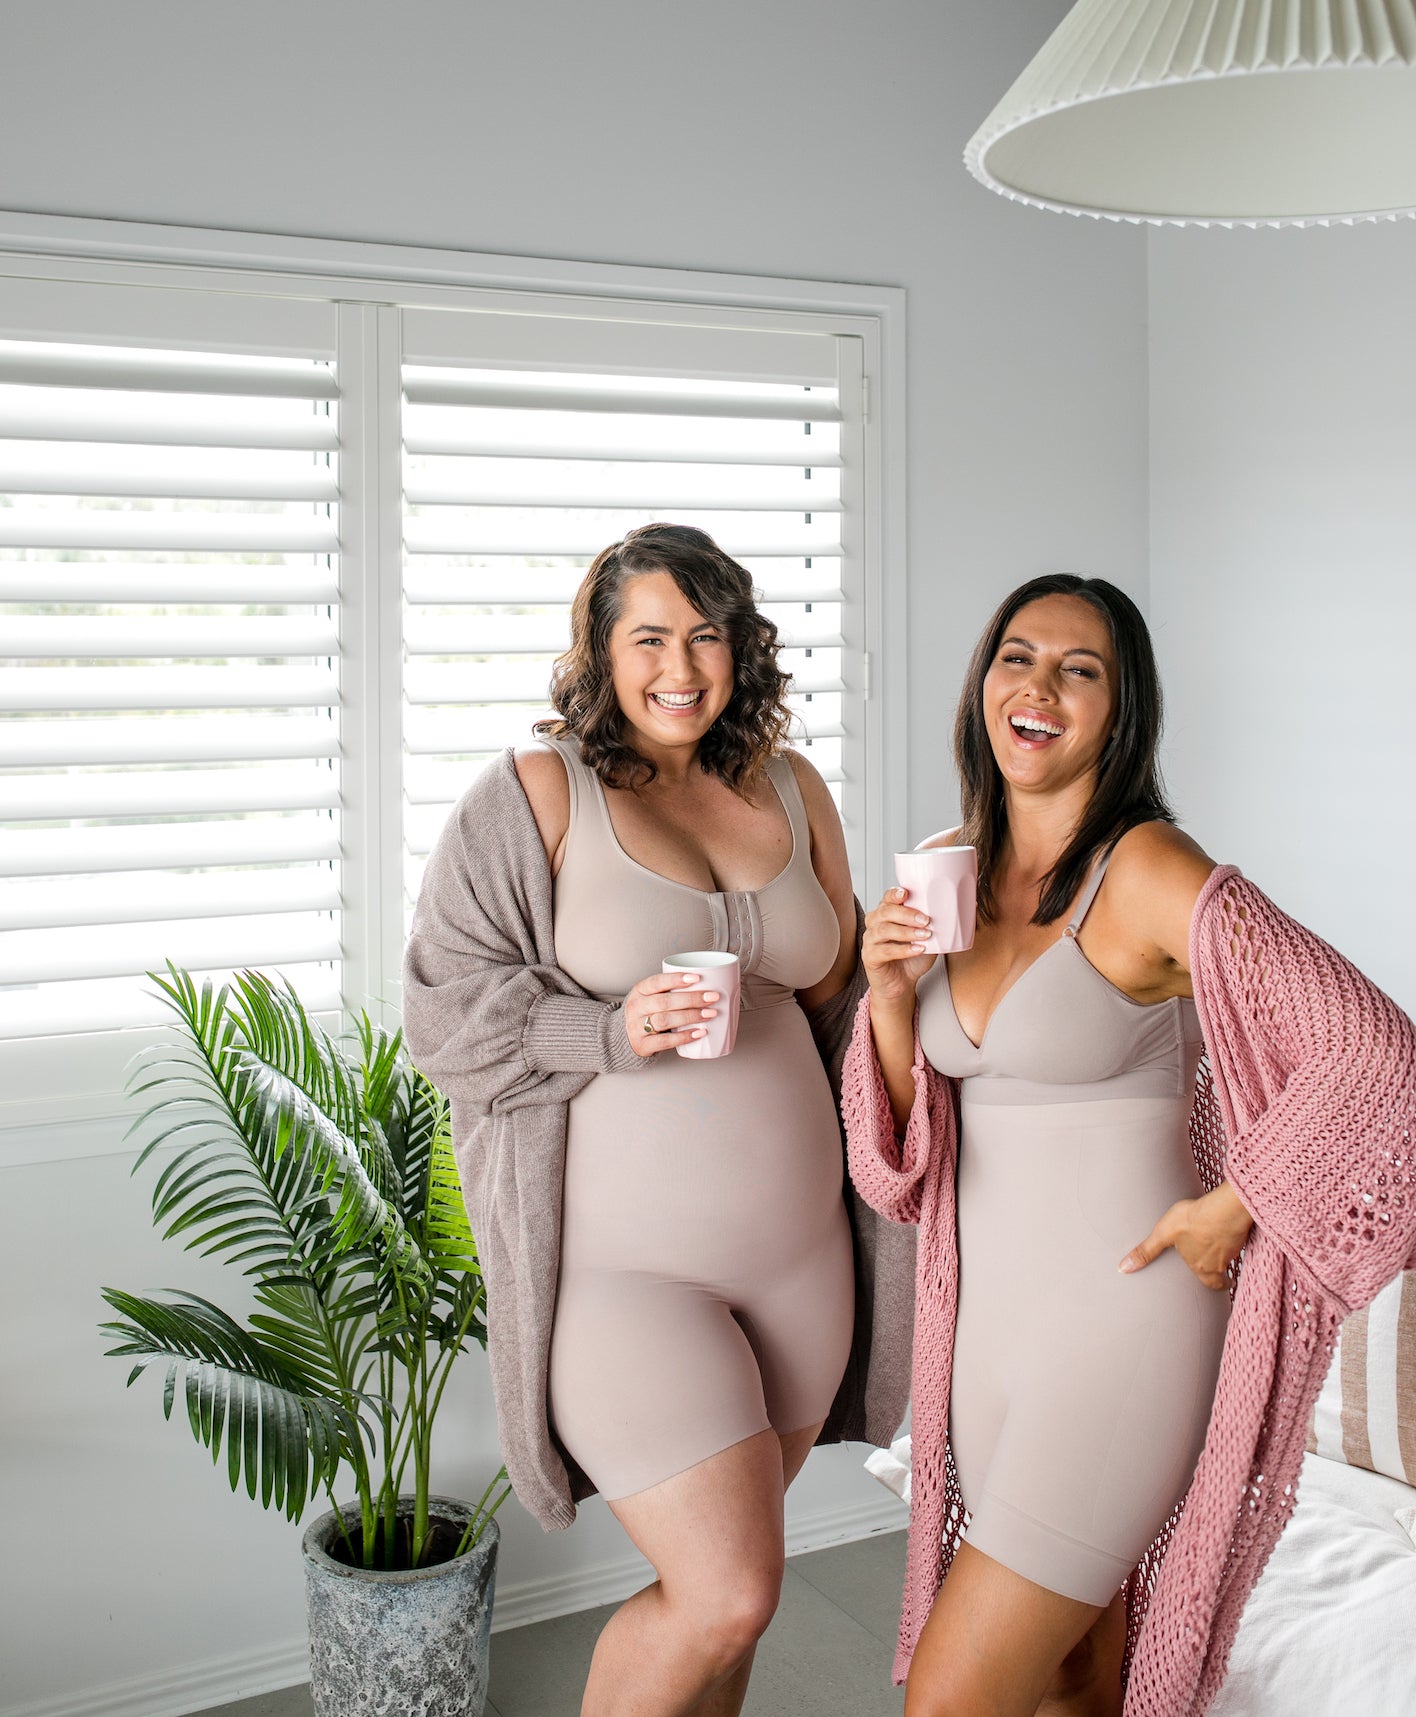 The Body Shapers, Sydney NSW